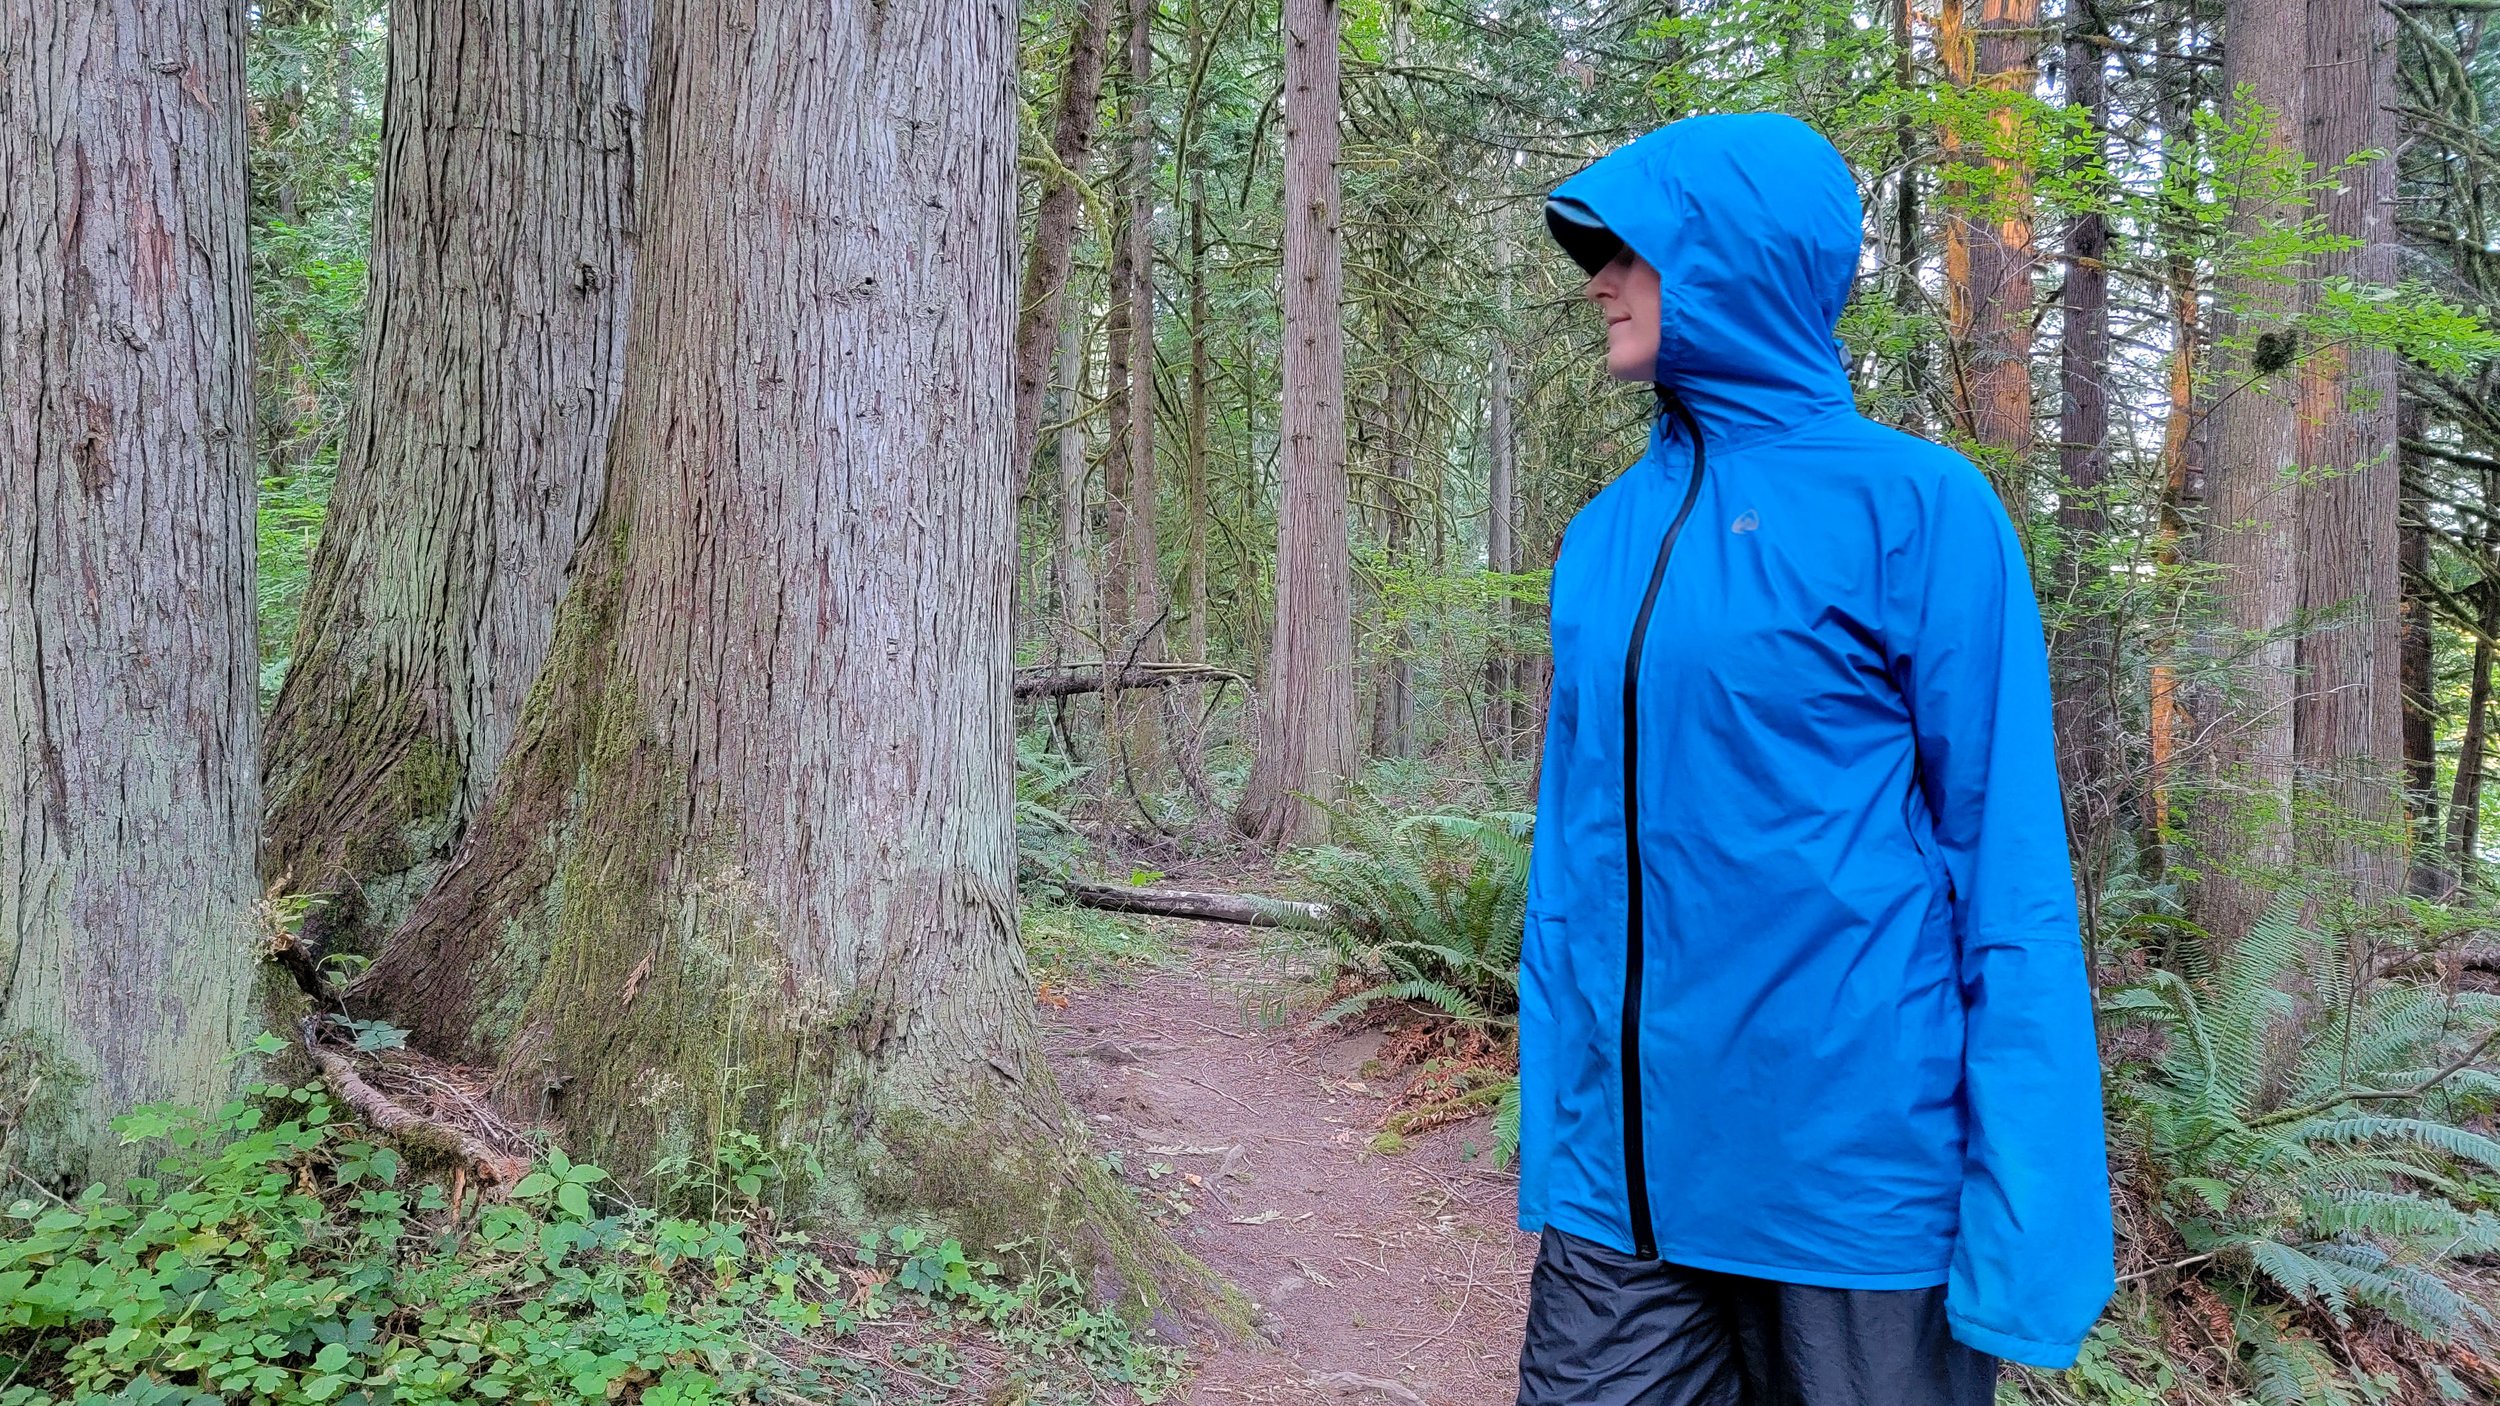 A hiker wearing the Zpacks Vertice rain jacket with the hood up in a forest